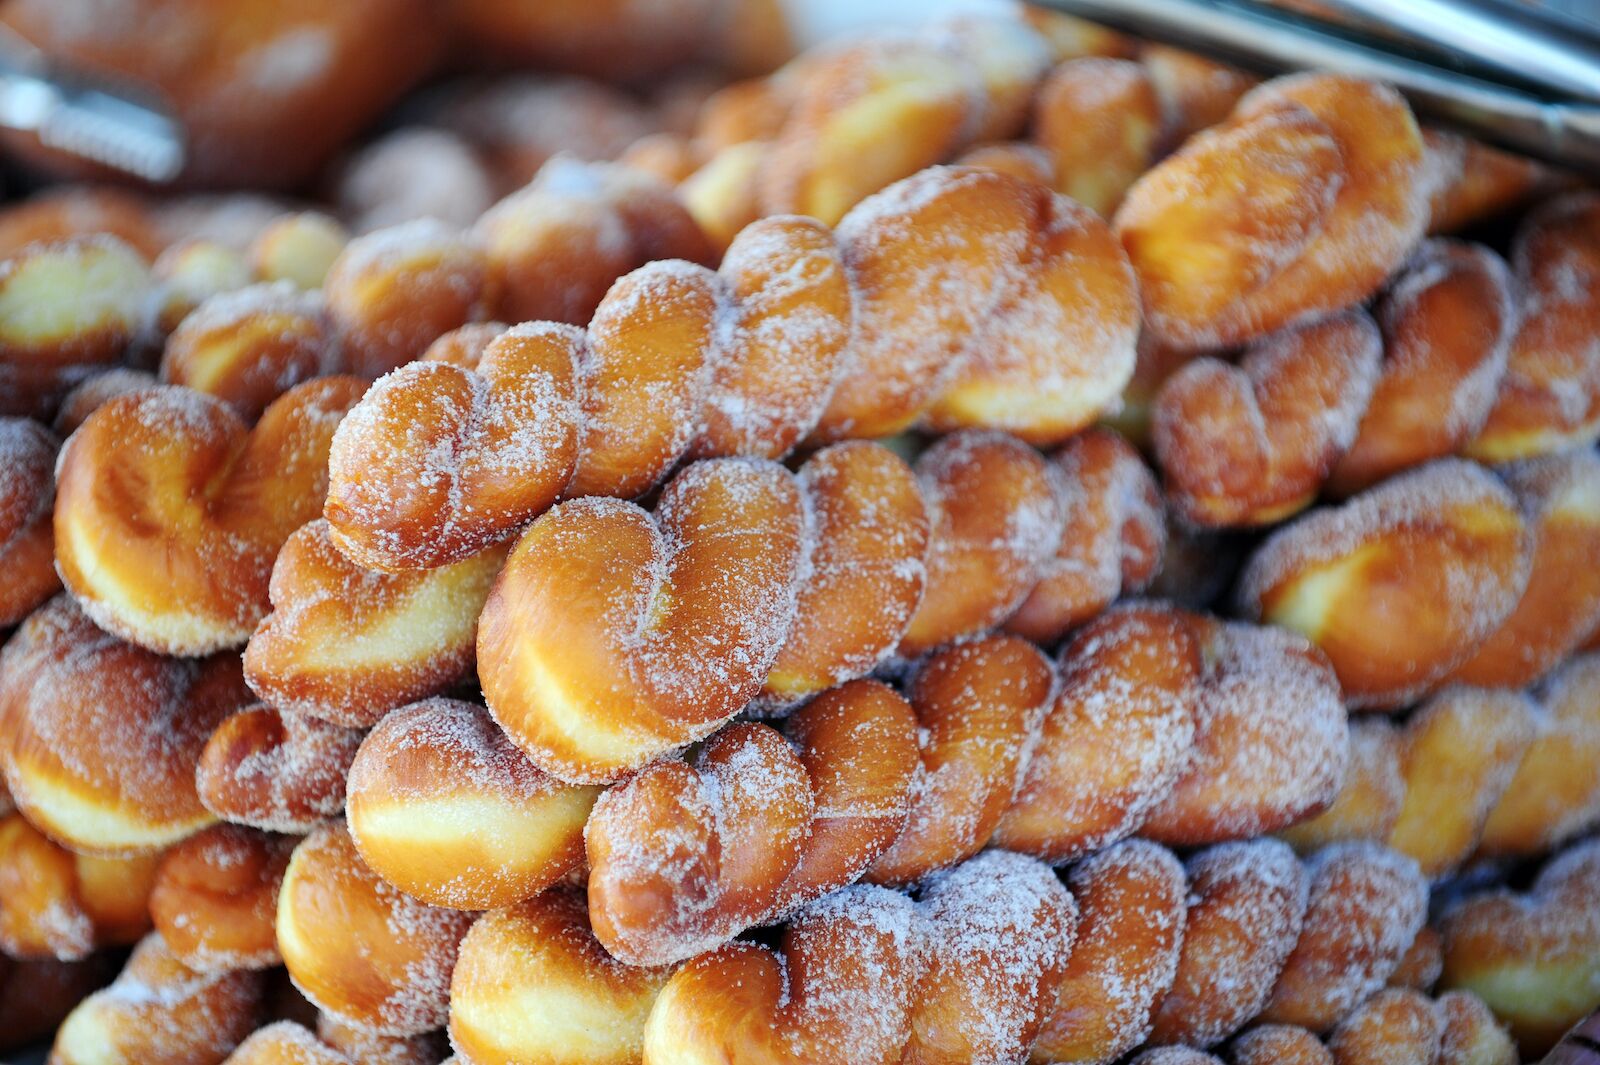 A stack of twiested donuts sprinkled with sugar at a bakery